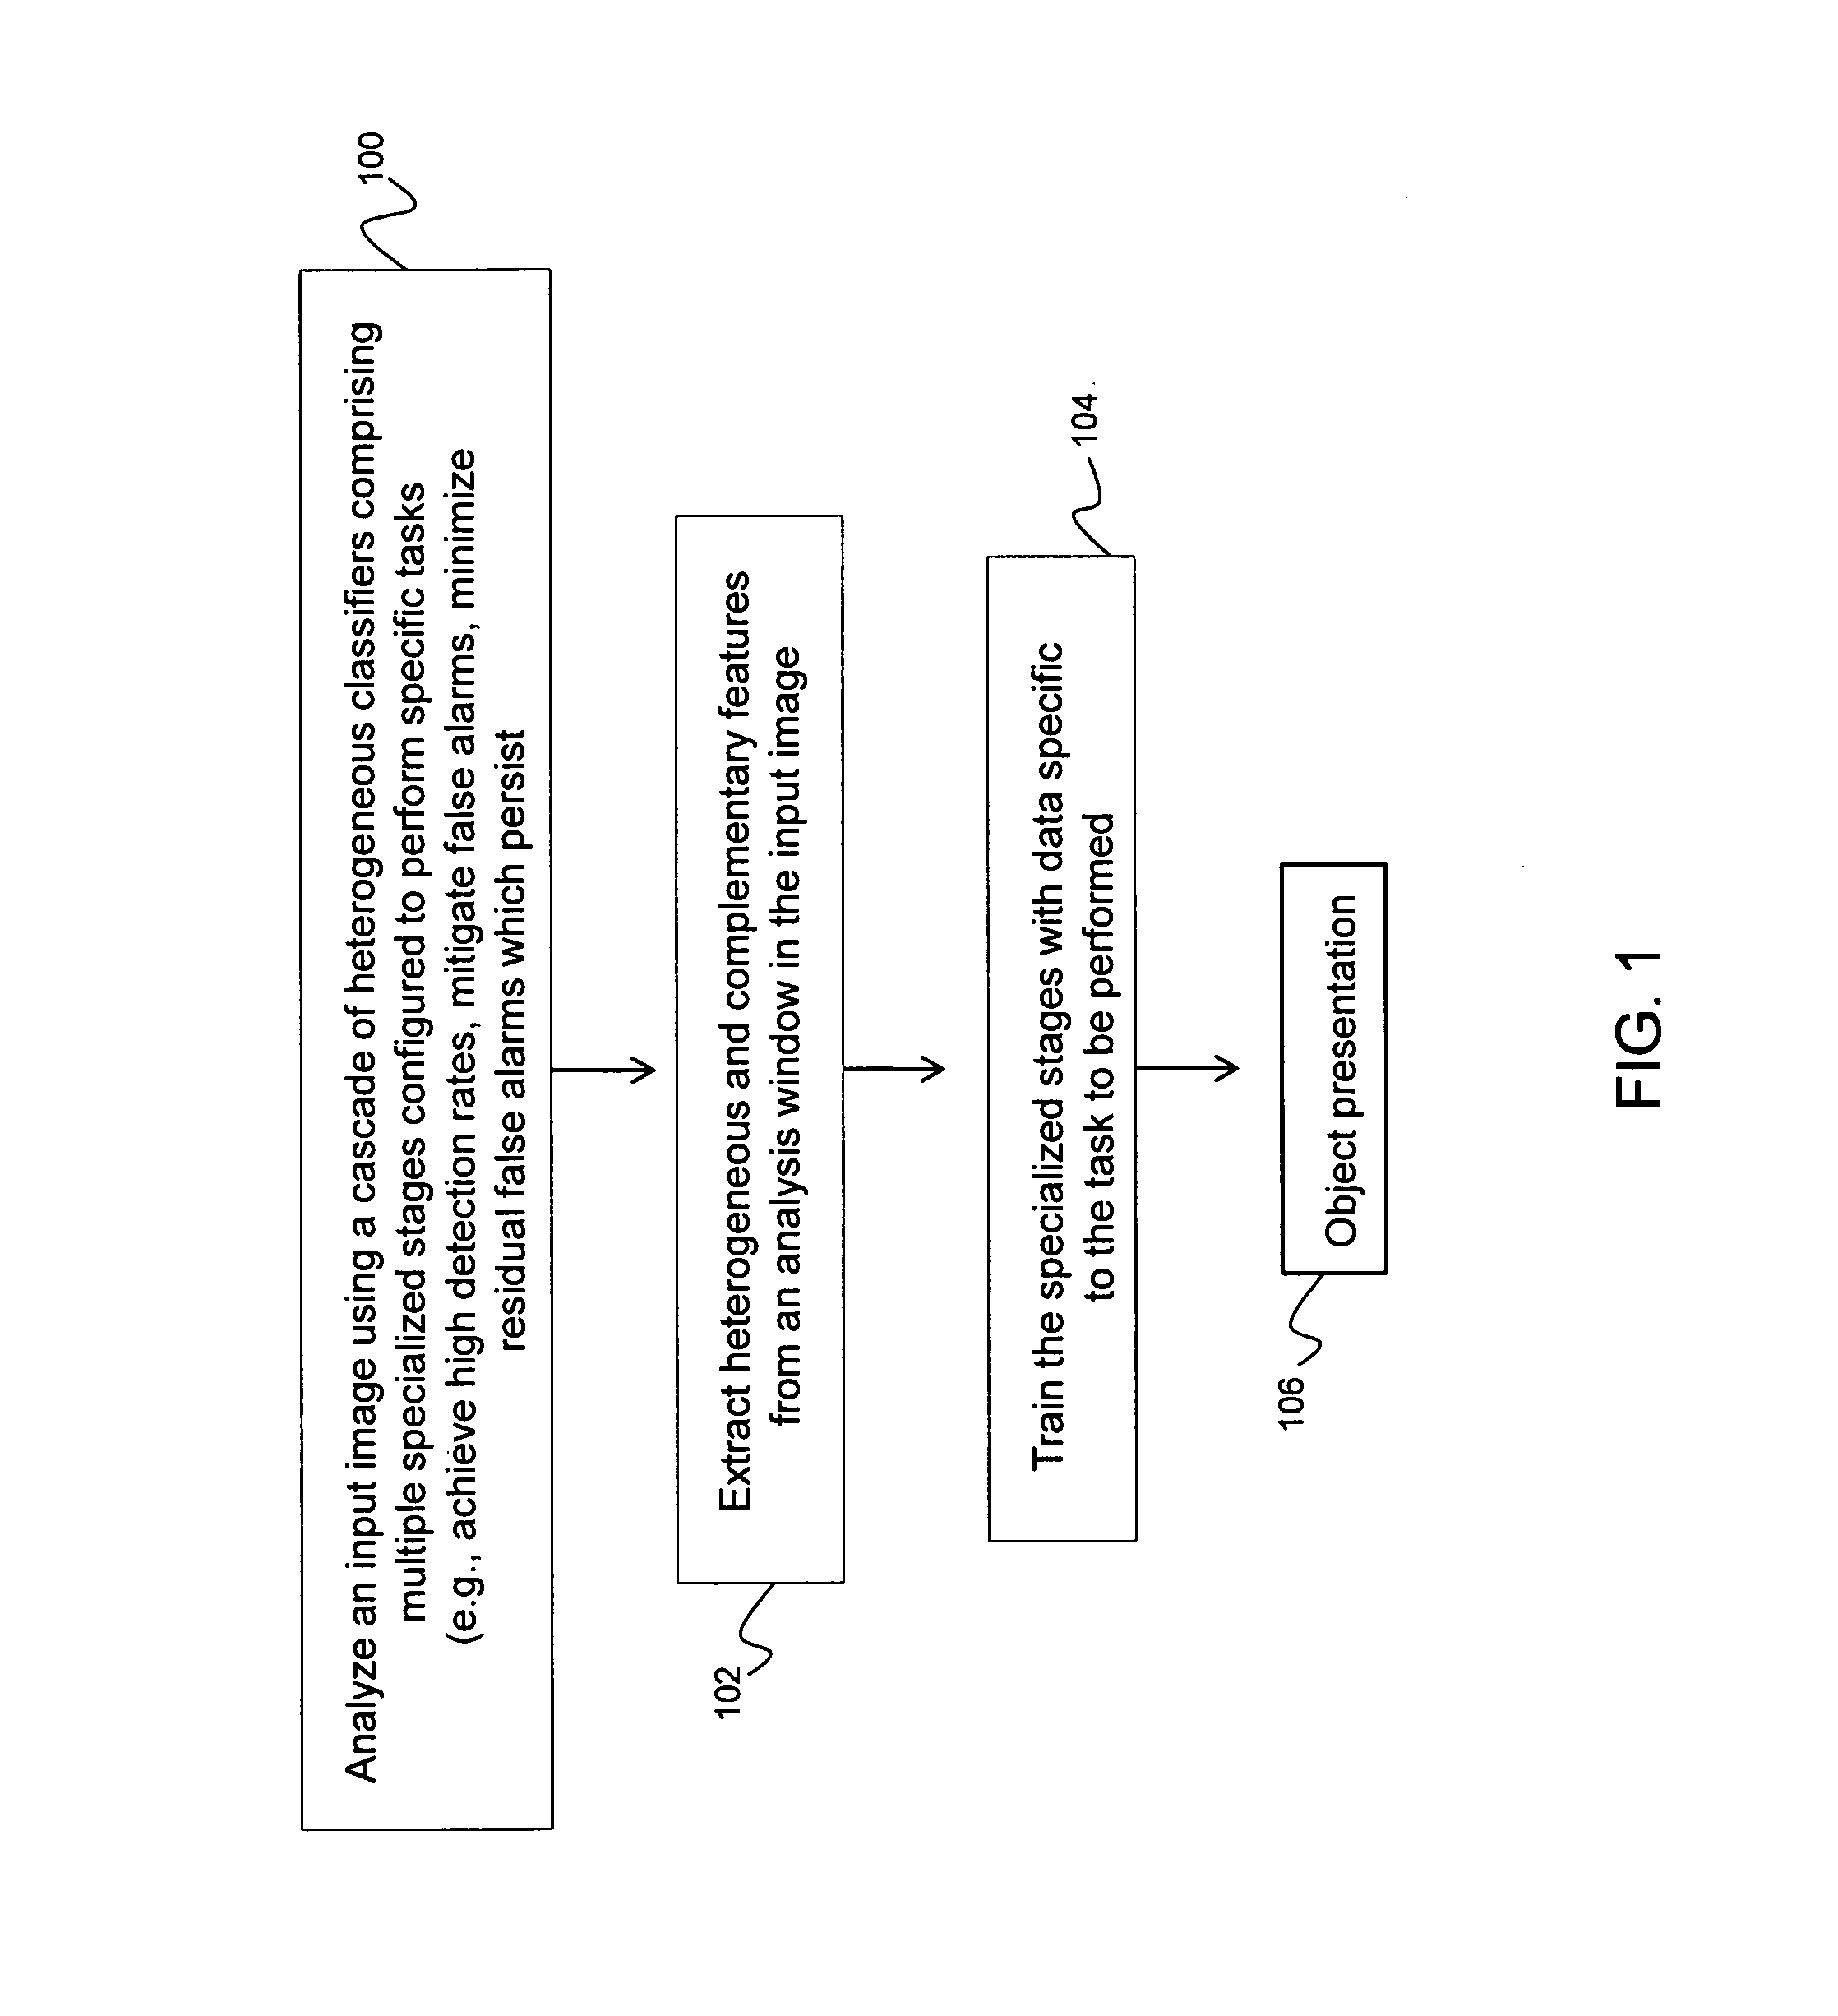 System for visual object recognition using heterogeneous classifier cascades